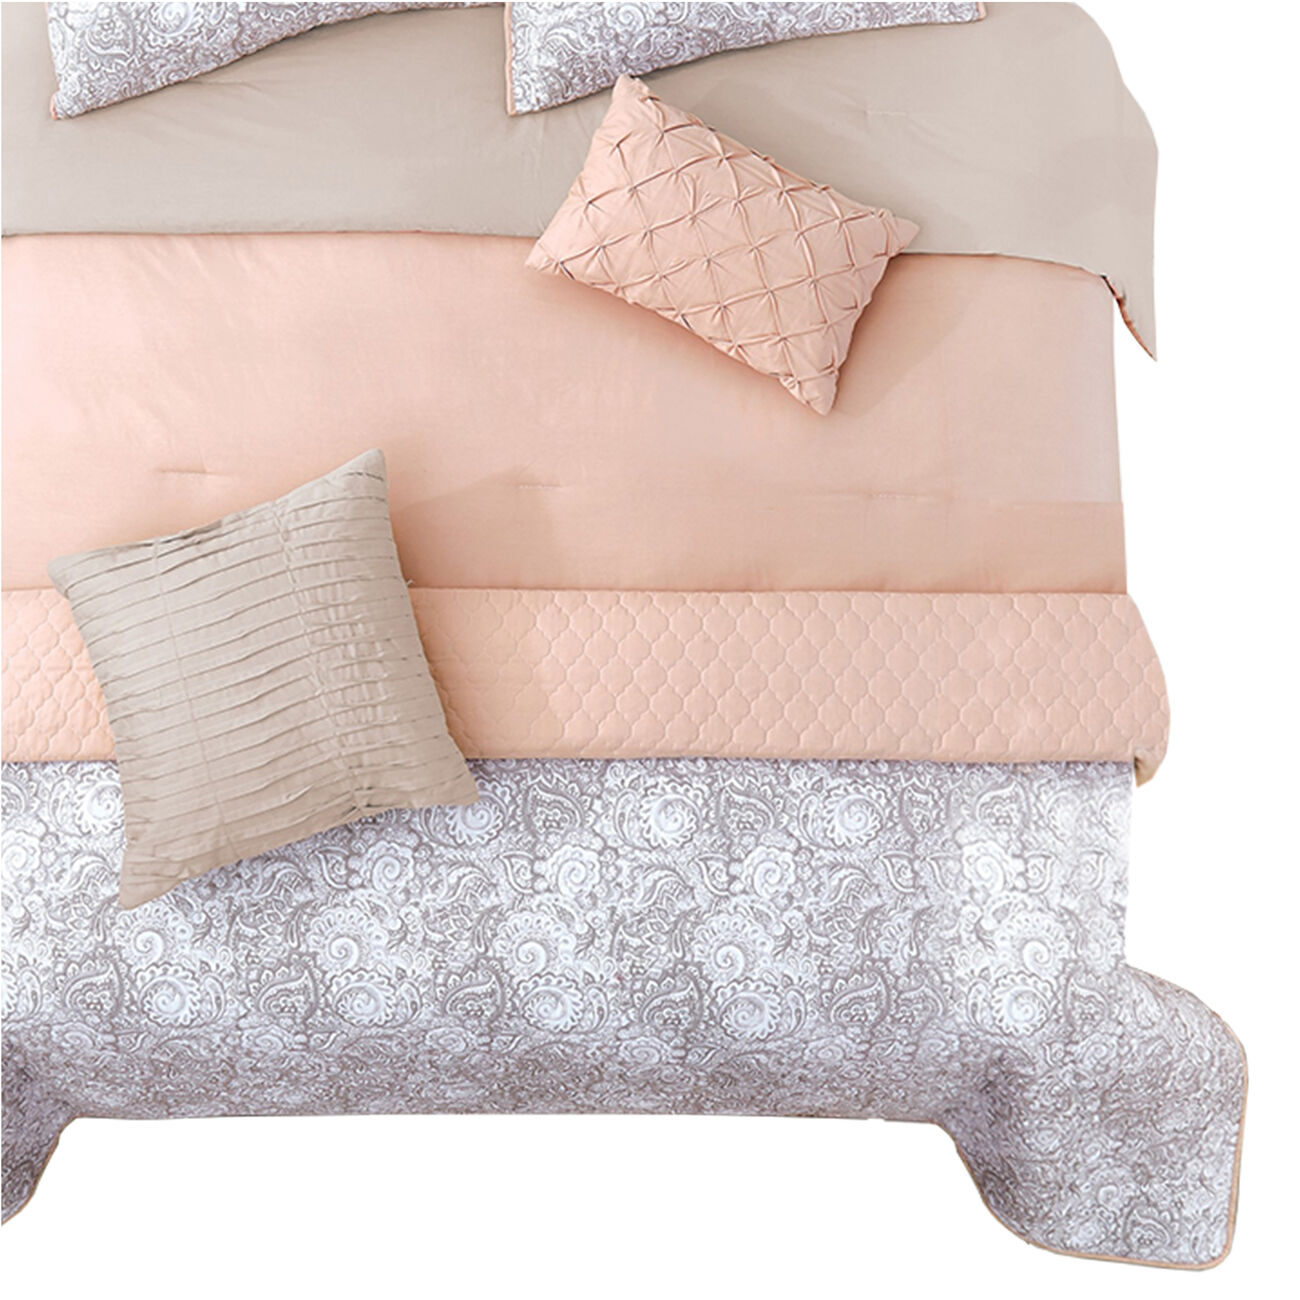 8 Piece Queen Comforter and Coverlet Set with Floral Swirl Pattern, Pink